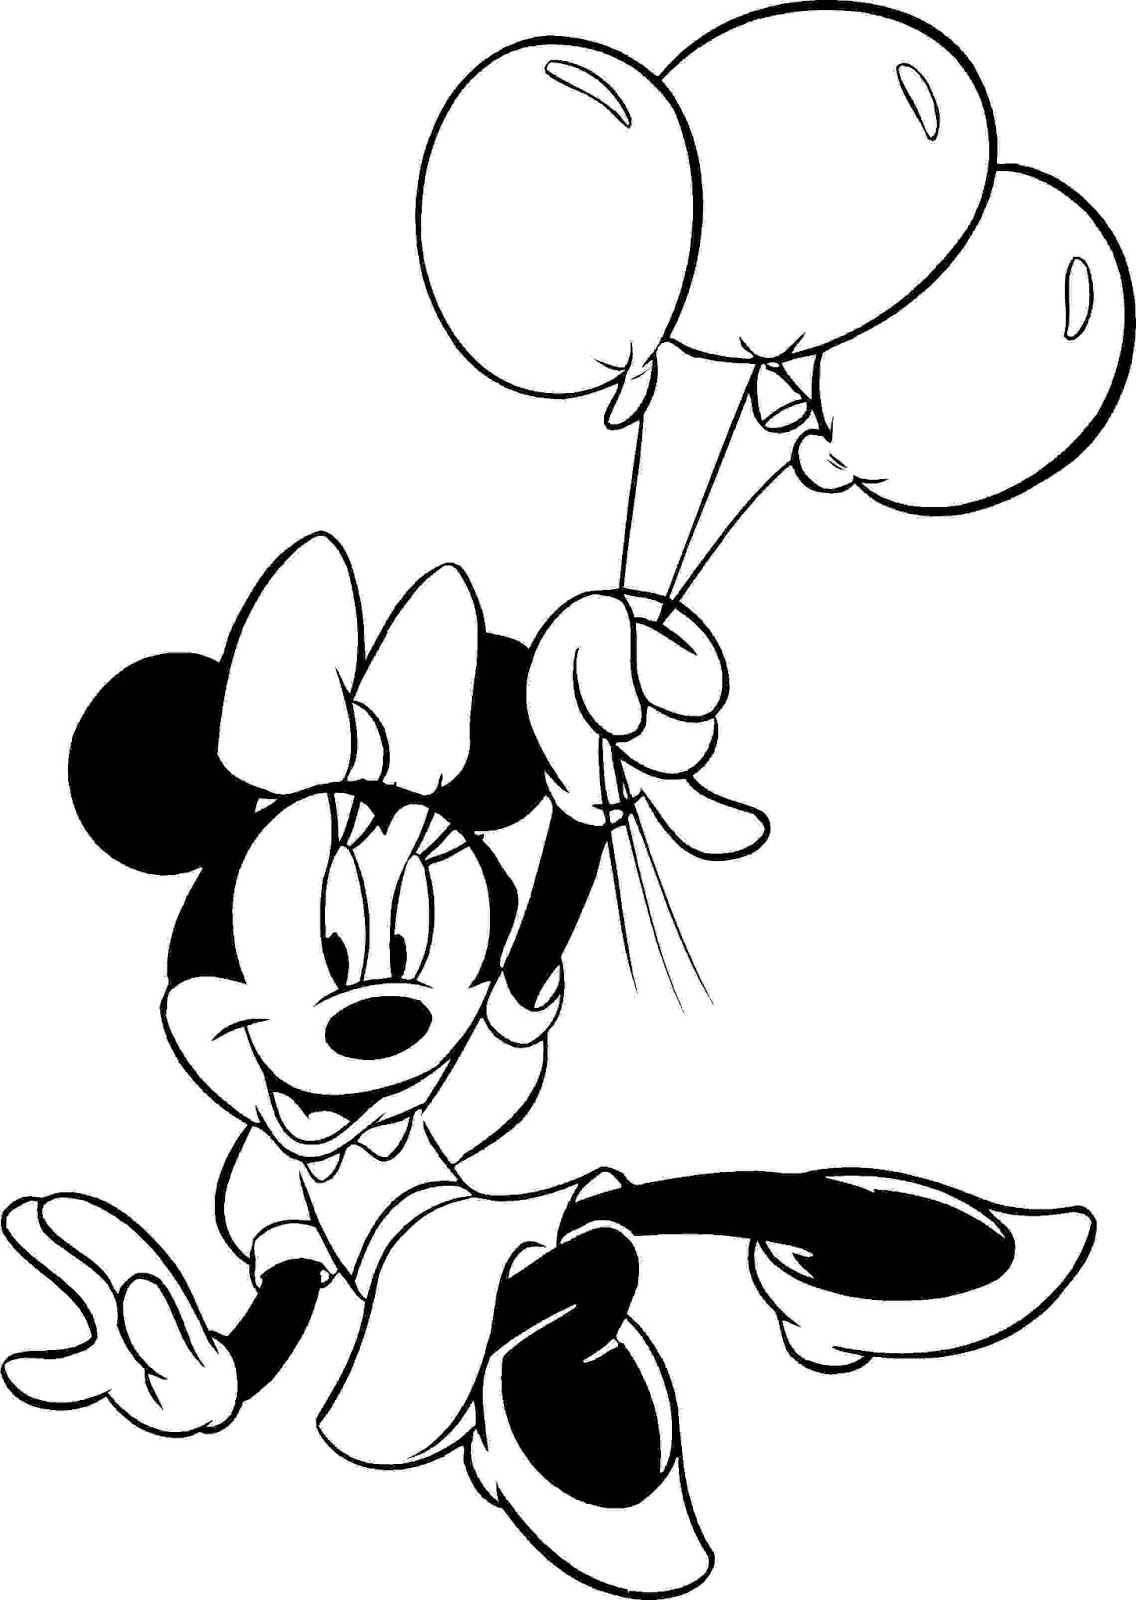 minnie-mouse-smiling-coloring-page-for-kids-free-minnie-mouse-printable-coloring-pages-online